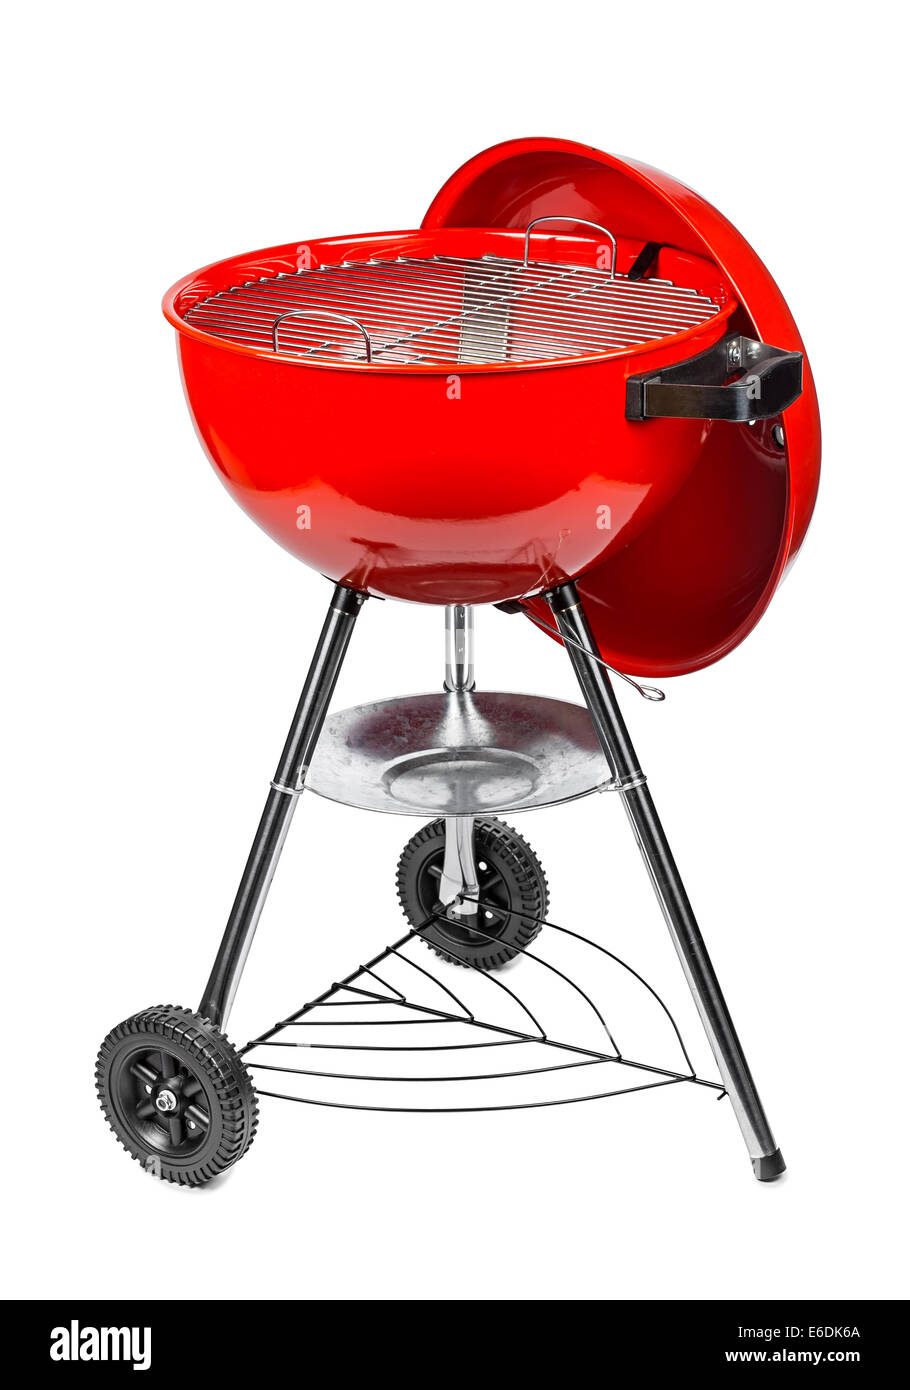 Grill électrique rouge in front of white background Banque D'Images